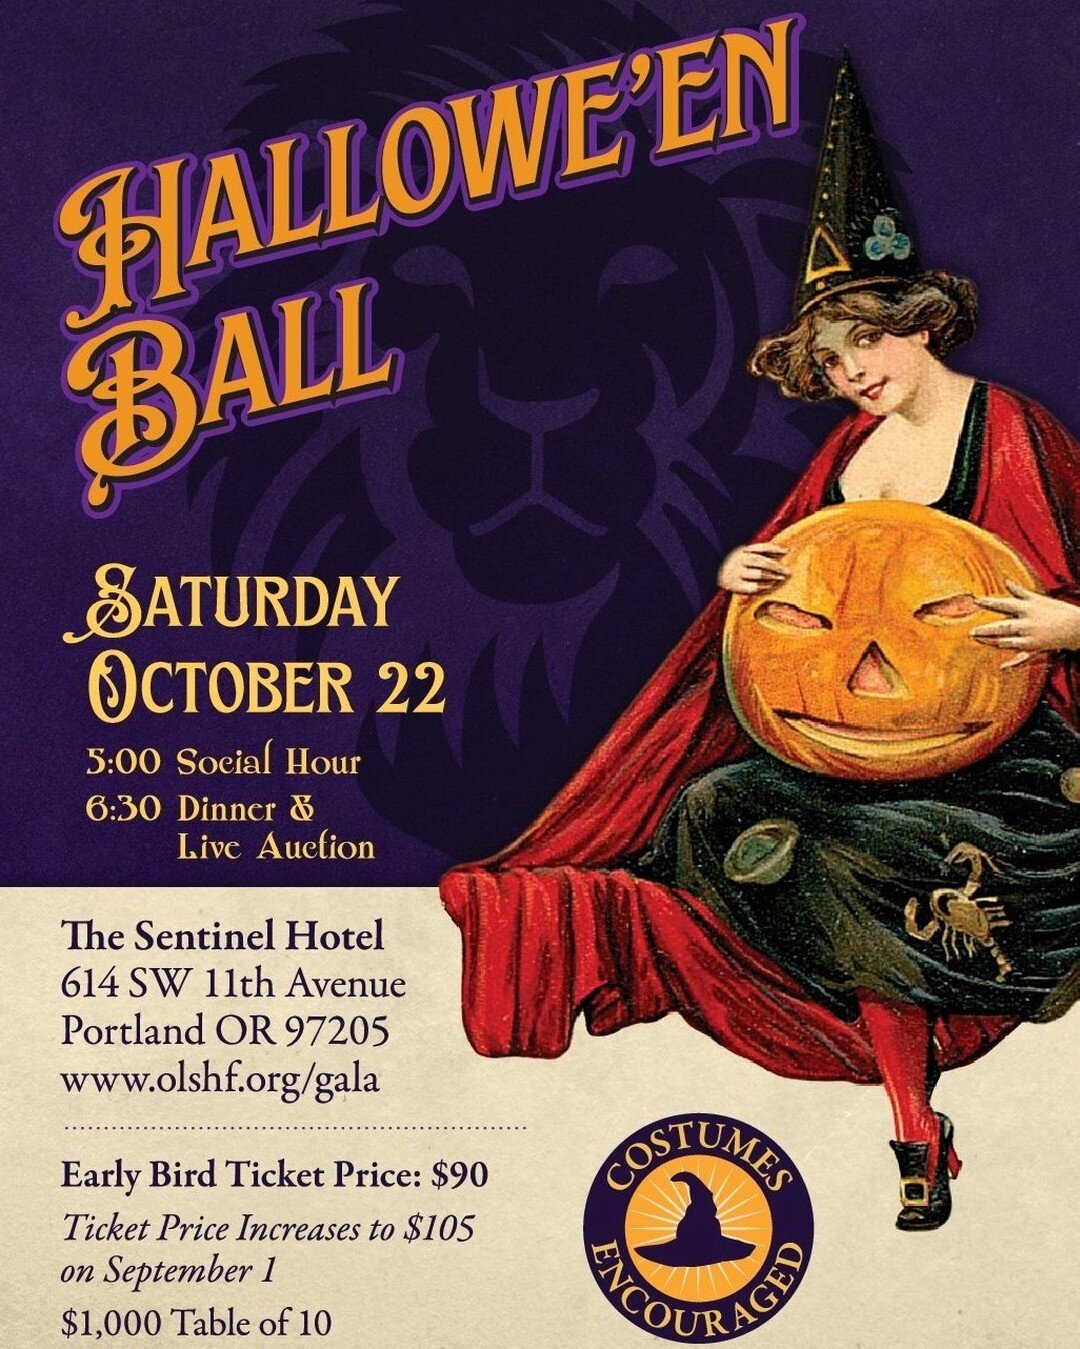 Only 20 more days to snap up your Gala tickets before the price changes! Save some cash &amp; purchase your Early Bird Gala Ticket for $90 before Sept 1! 

Visit https://olshf.org/gala to securely buy your tickets and learn more about the Hallowe'en 